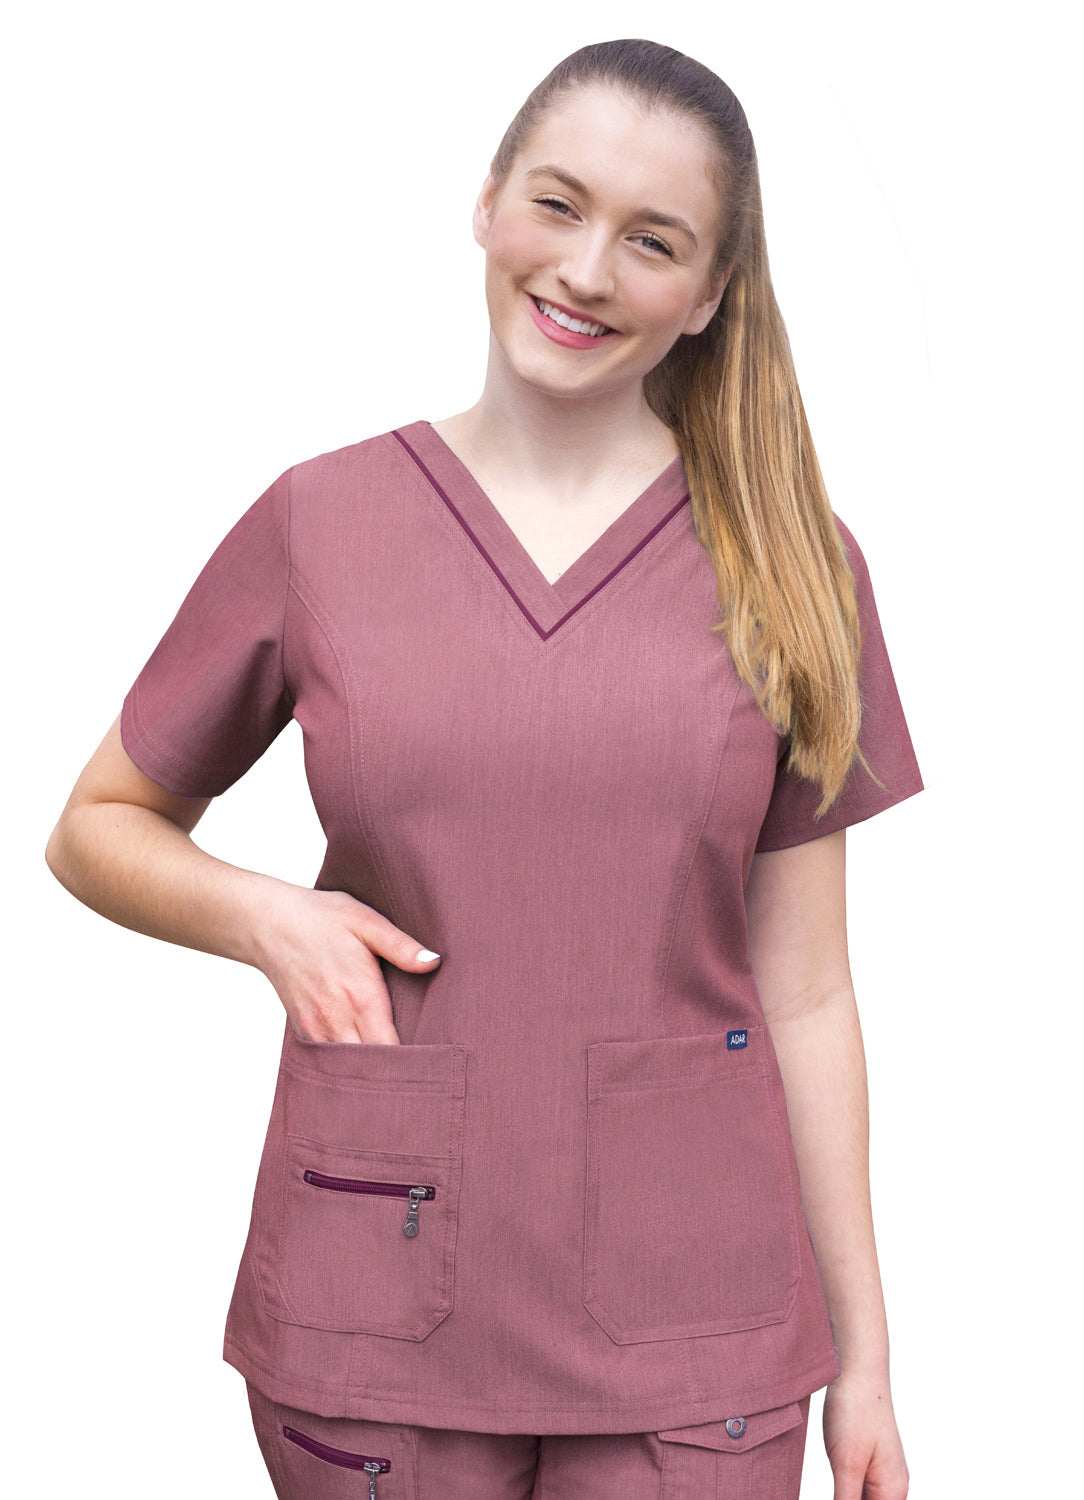 womens-elevated-v-neck-scrub-top-heather-collection.jpg